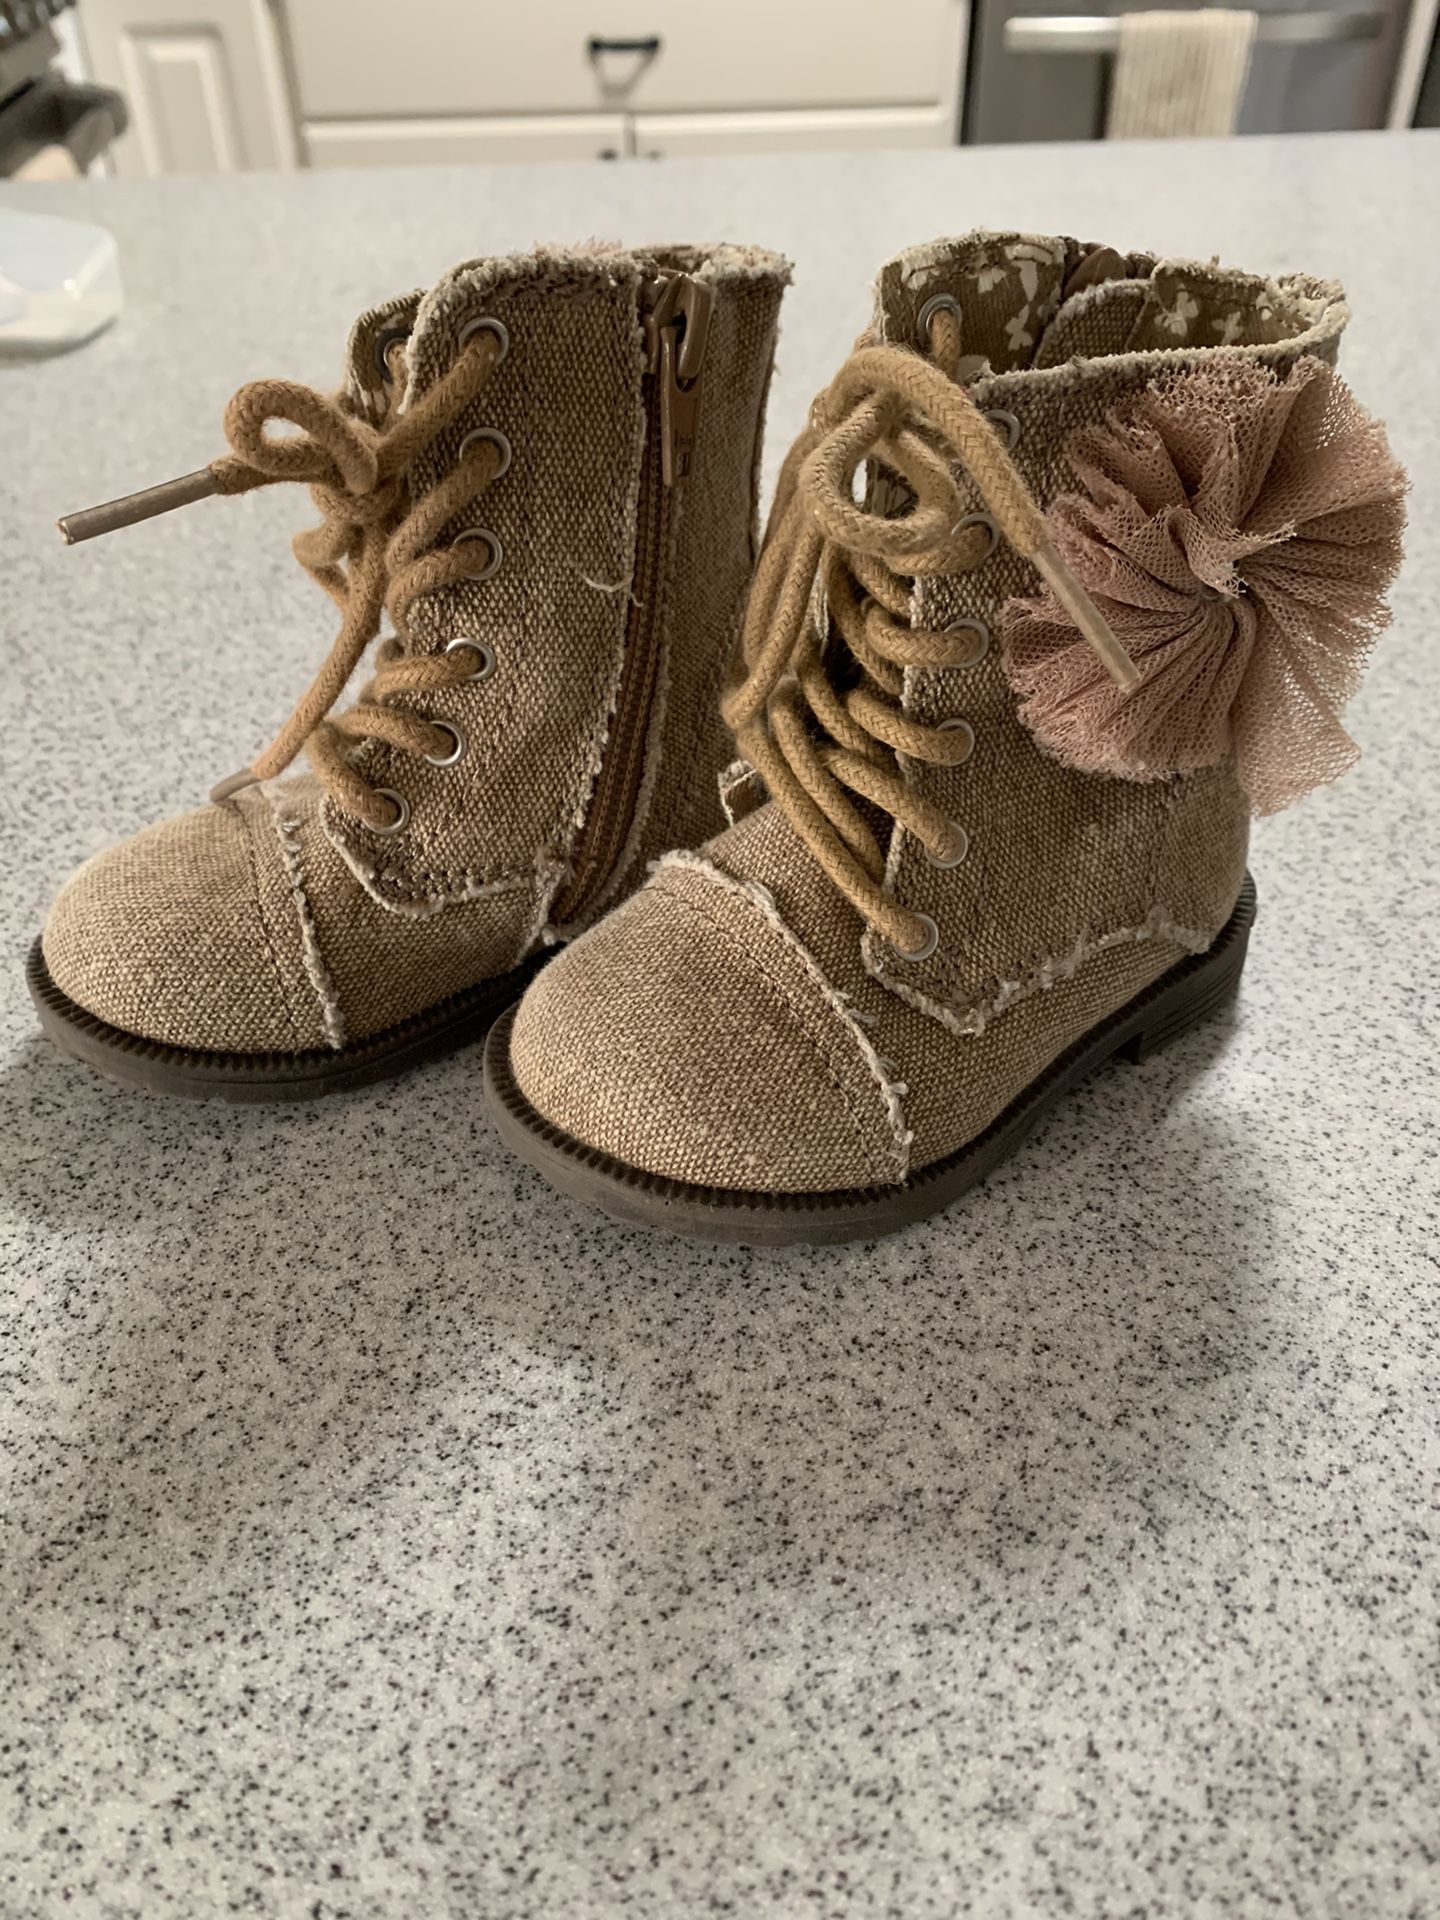 Toddler girl boots size 4